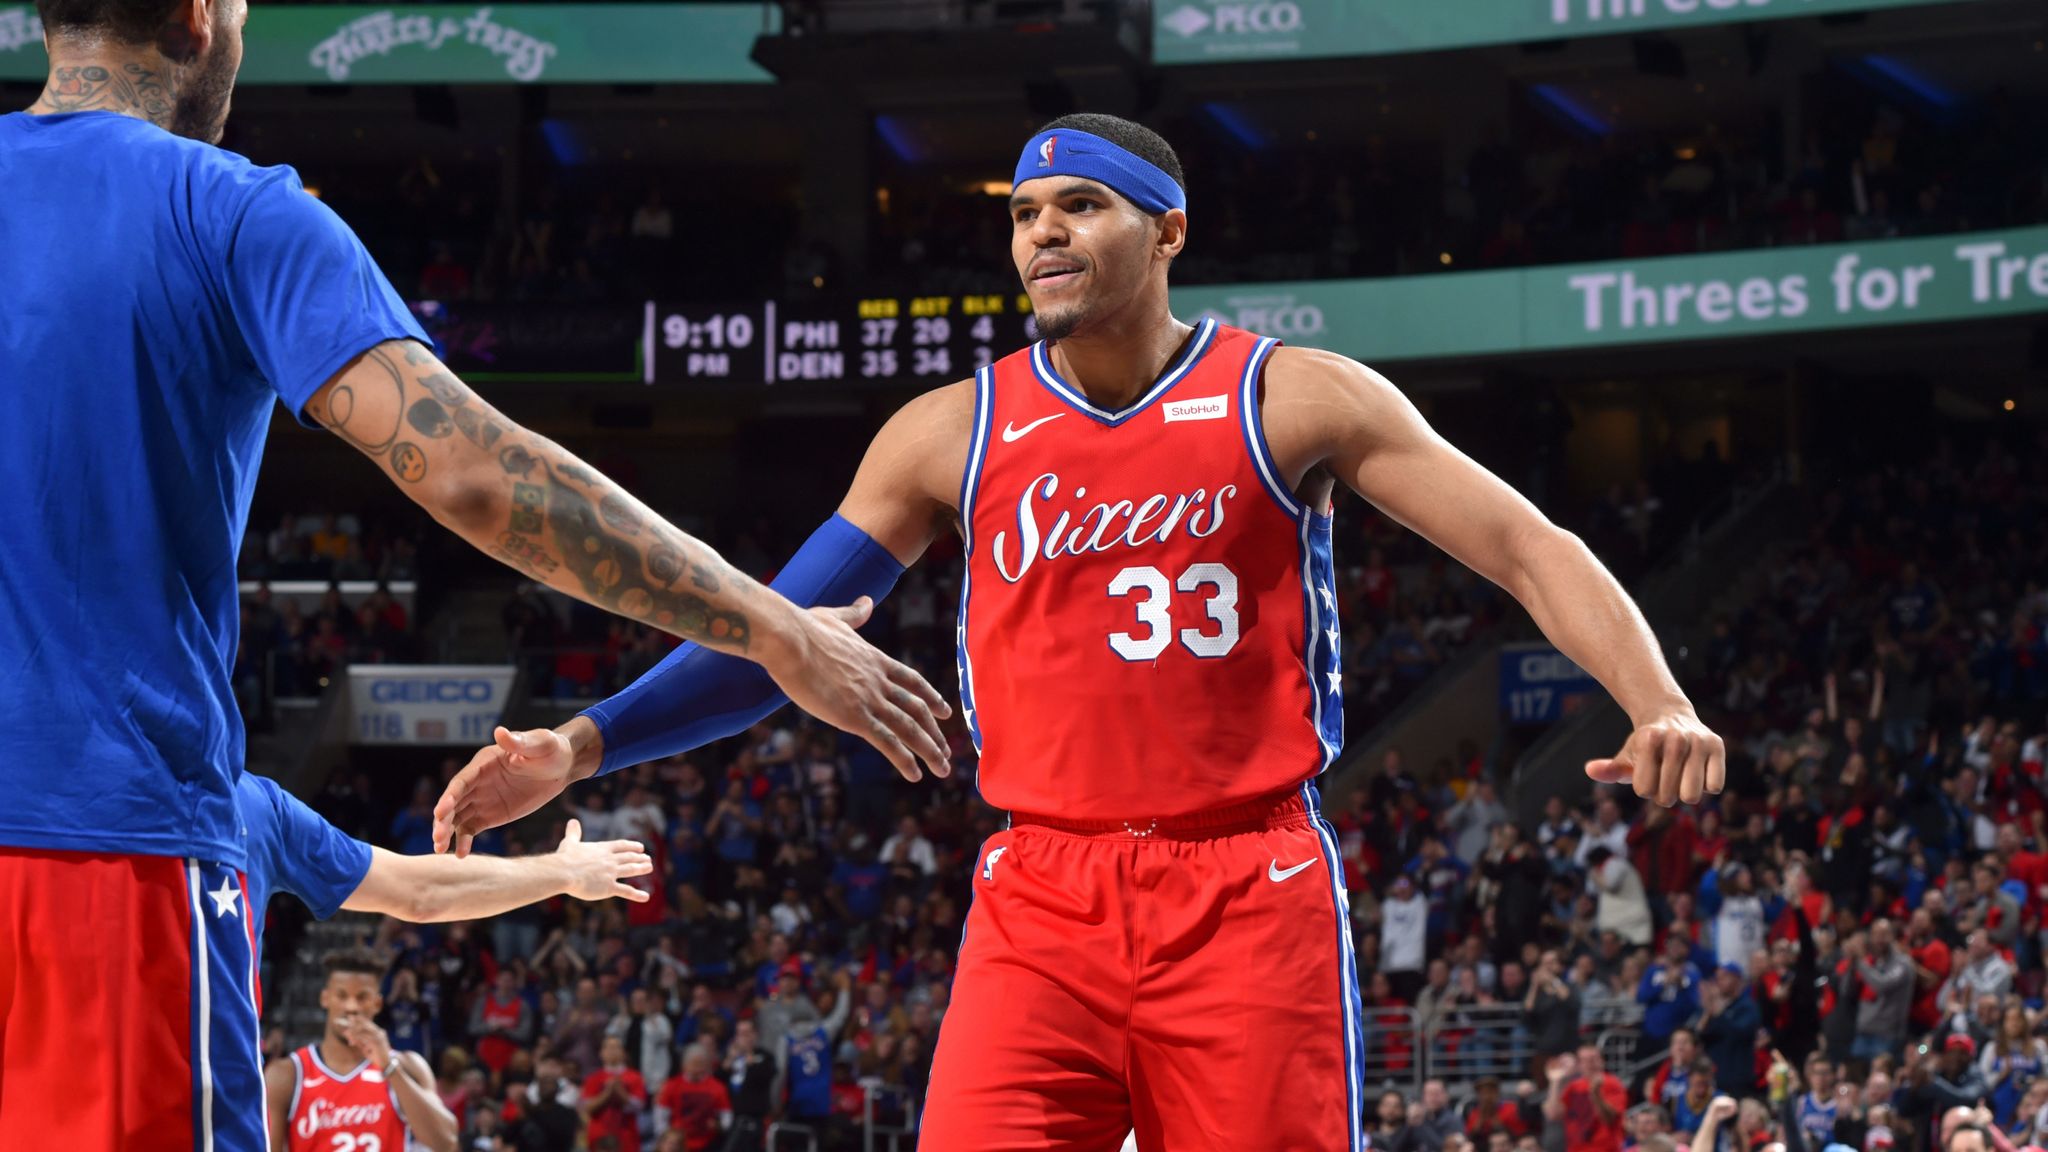 Sixers vs. Lakers: Tobias Harris, Joel Embiid star in win with